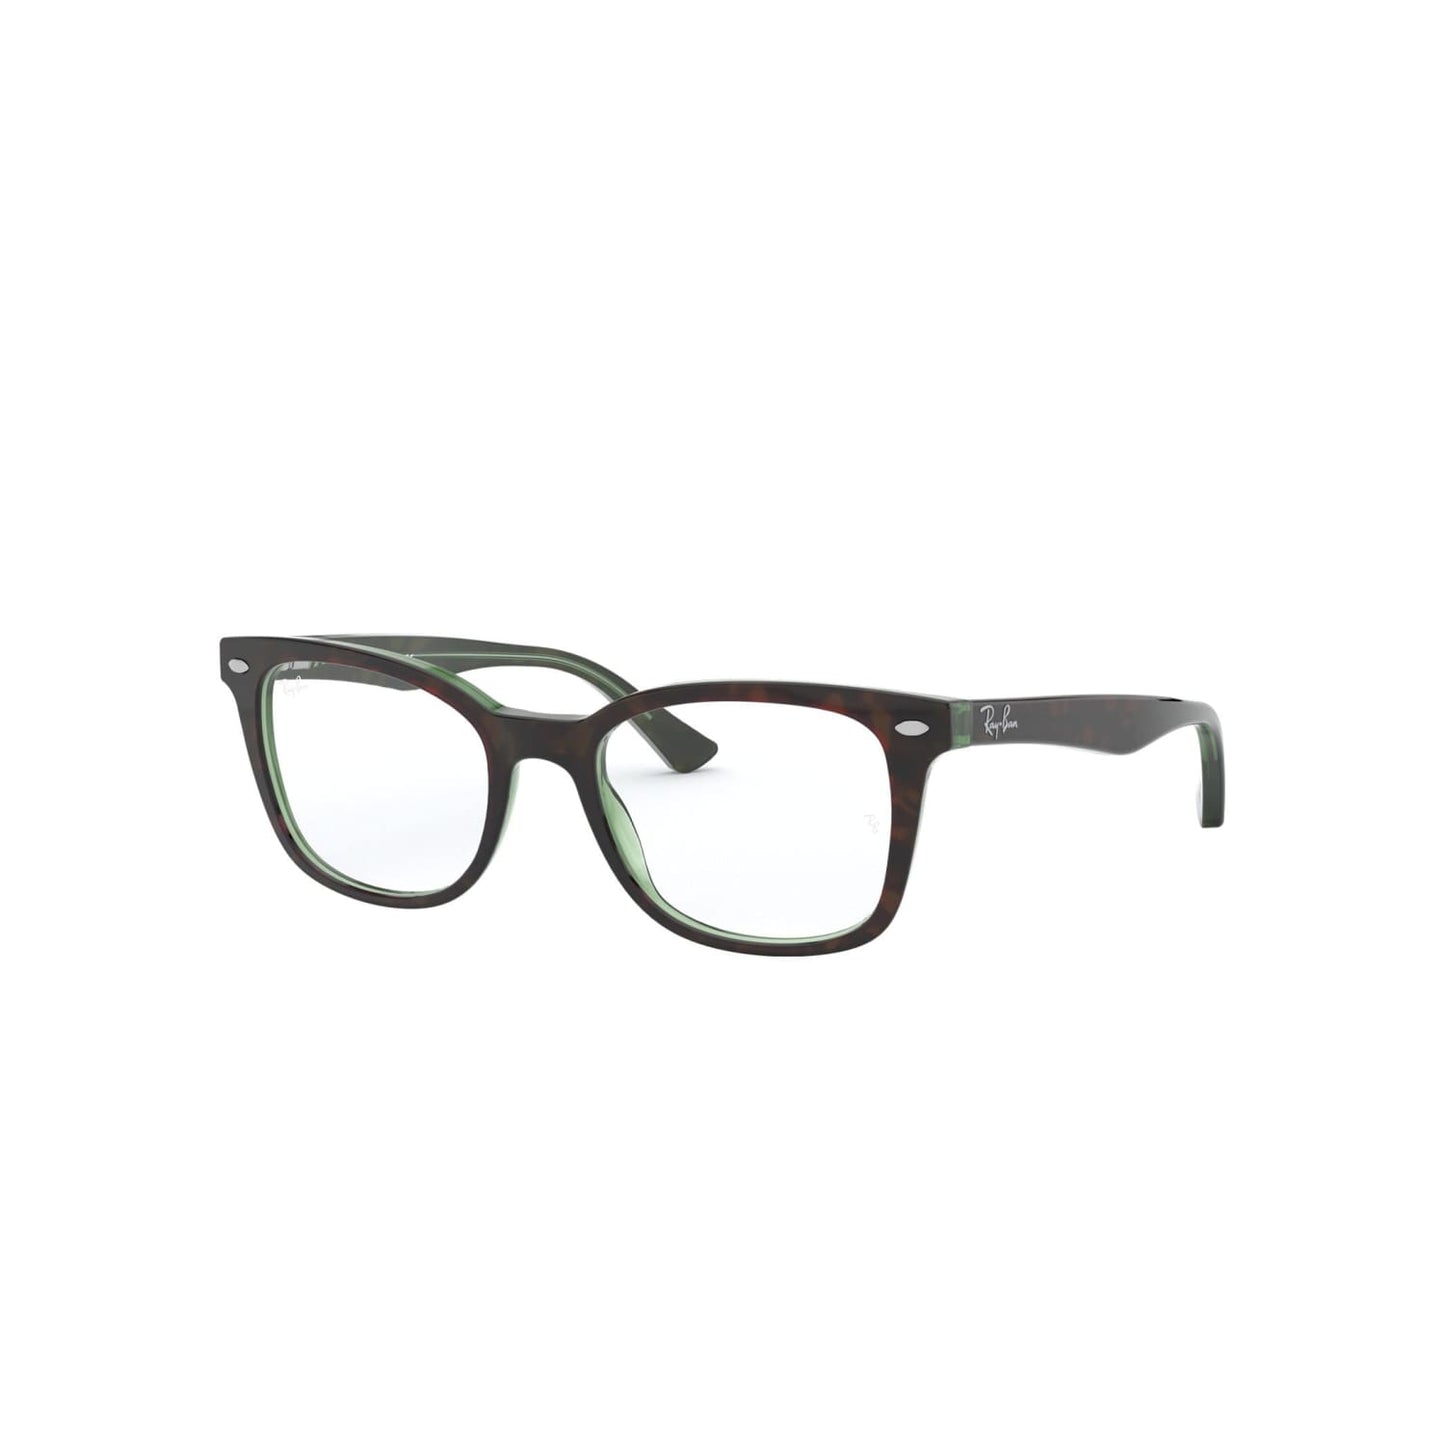 Ray-Ban RB5285-2383 Gloss Tortoise Butterfly Acetate Optical